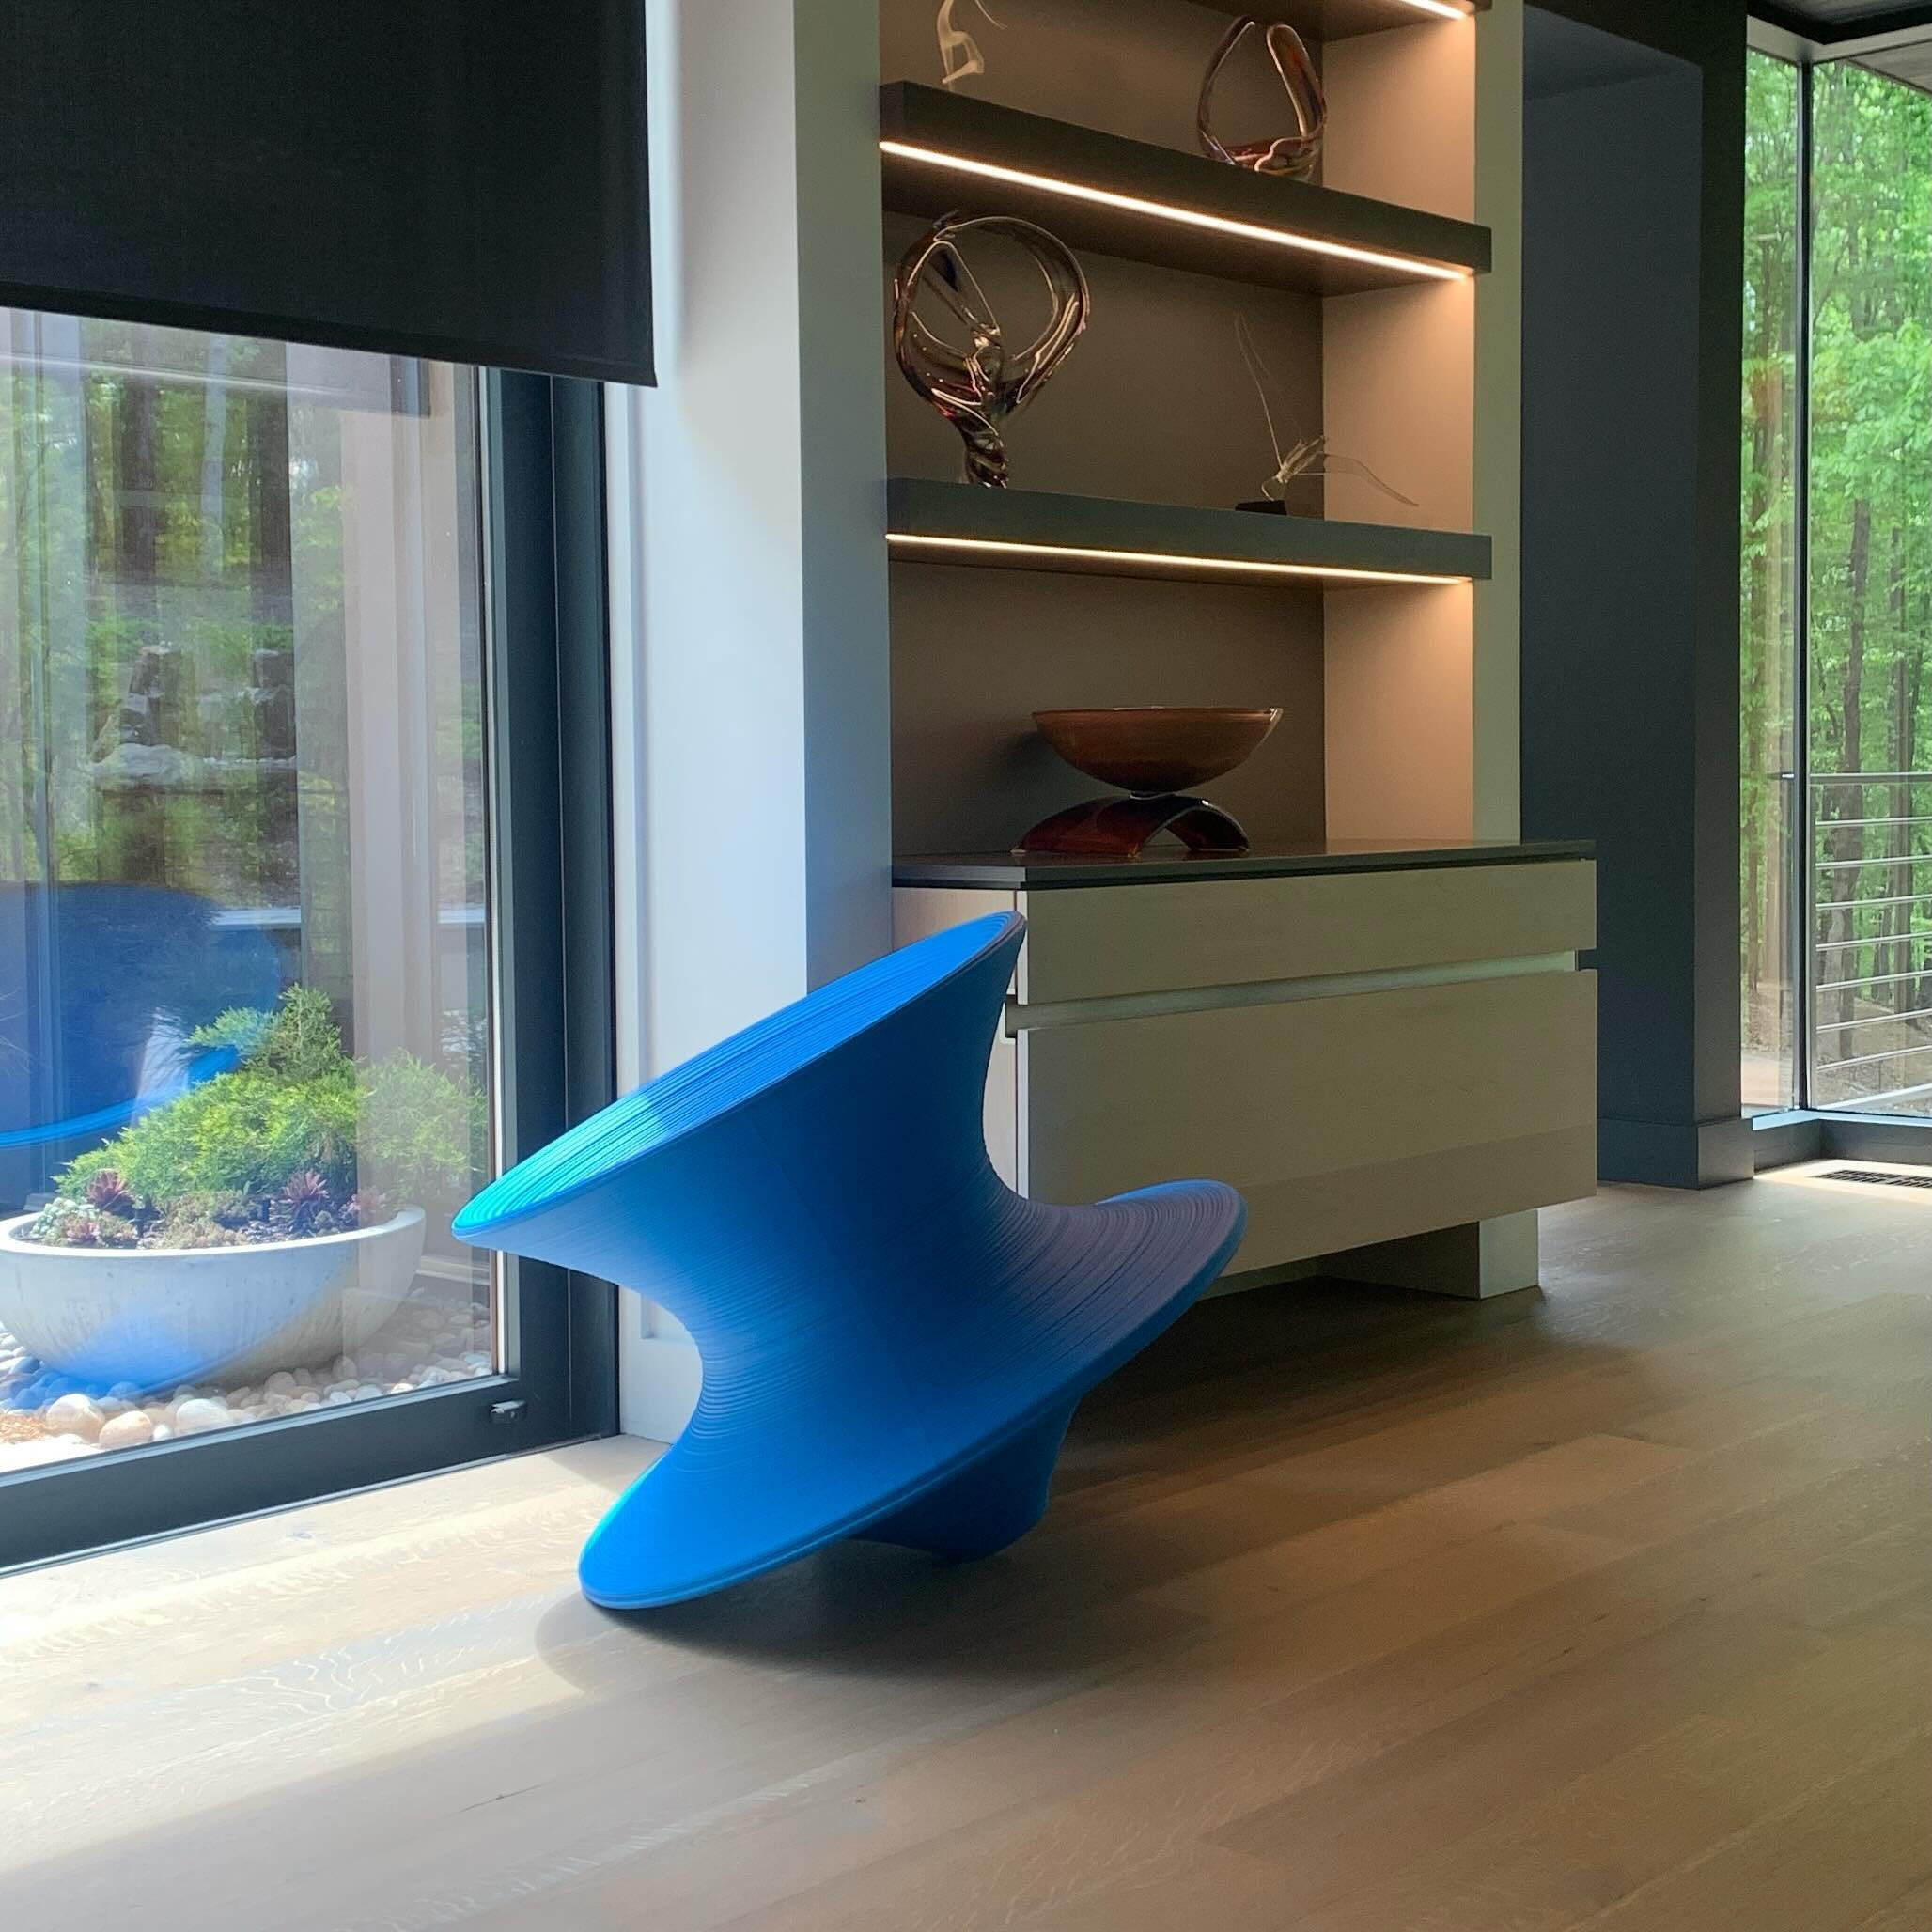 what can we say - style begets style - always good to step foot in our Gerend&aacute;k residence - and to see new lifestyle affirming acquisitions 
..
slideshow: #gerend&aacute;k #magis #spun #bestclientsever 
..
#modernhomes #raleighhomes #charlotte